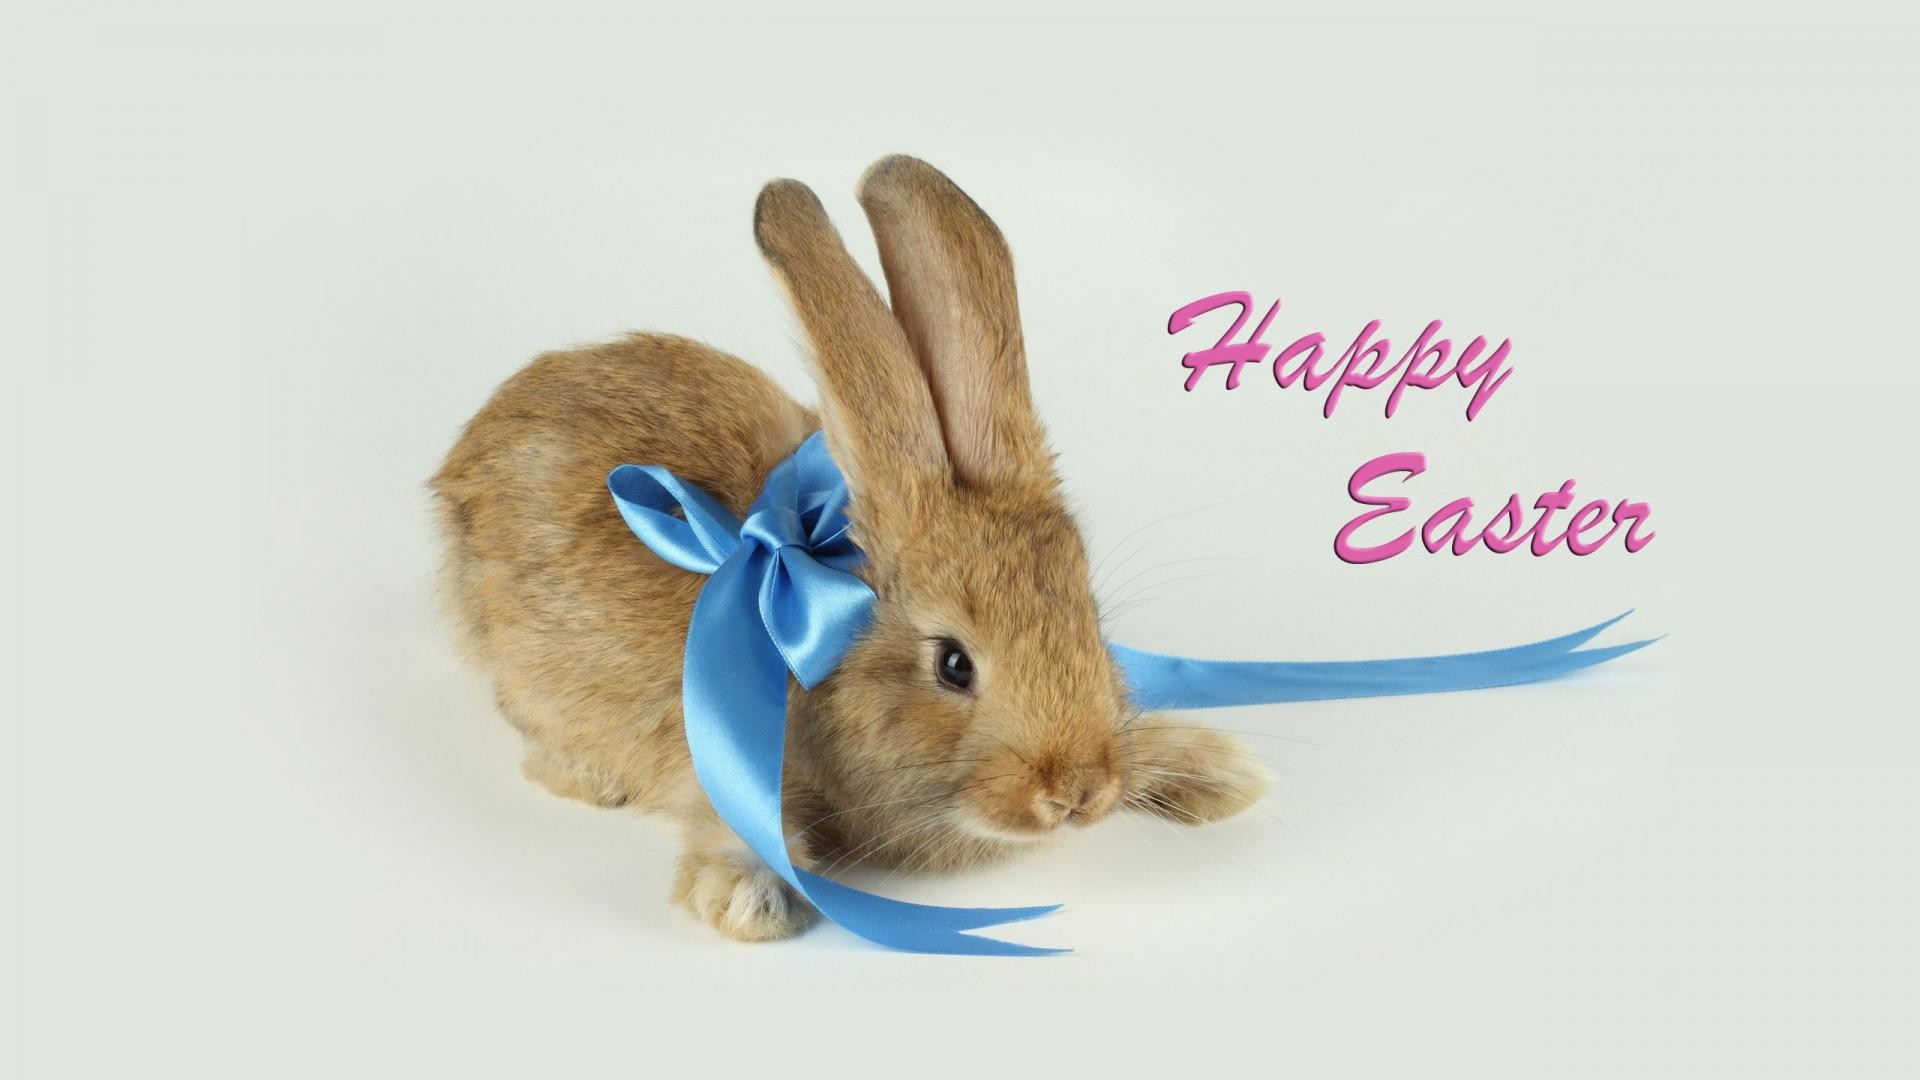 1920x1080 Happy Easter Bunny With Blue Bow